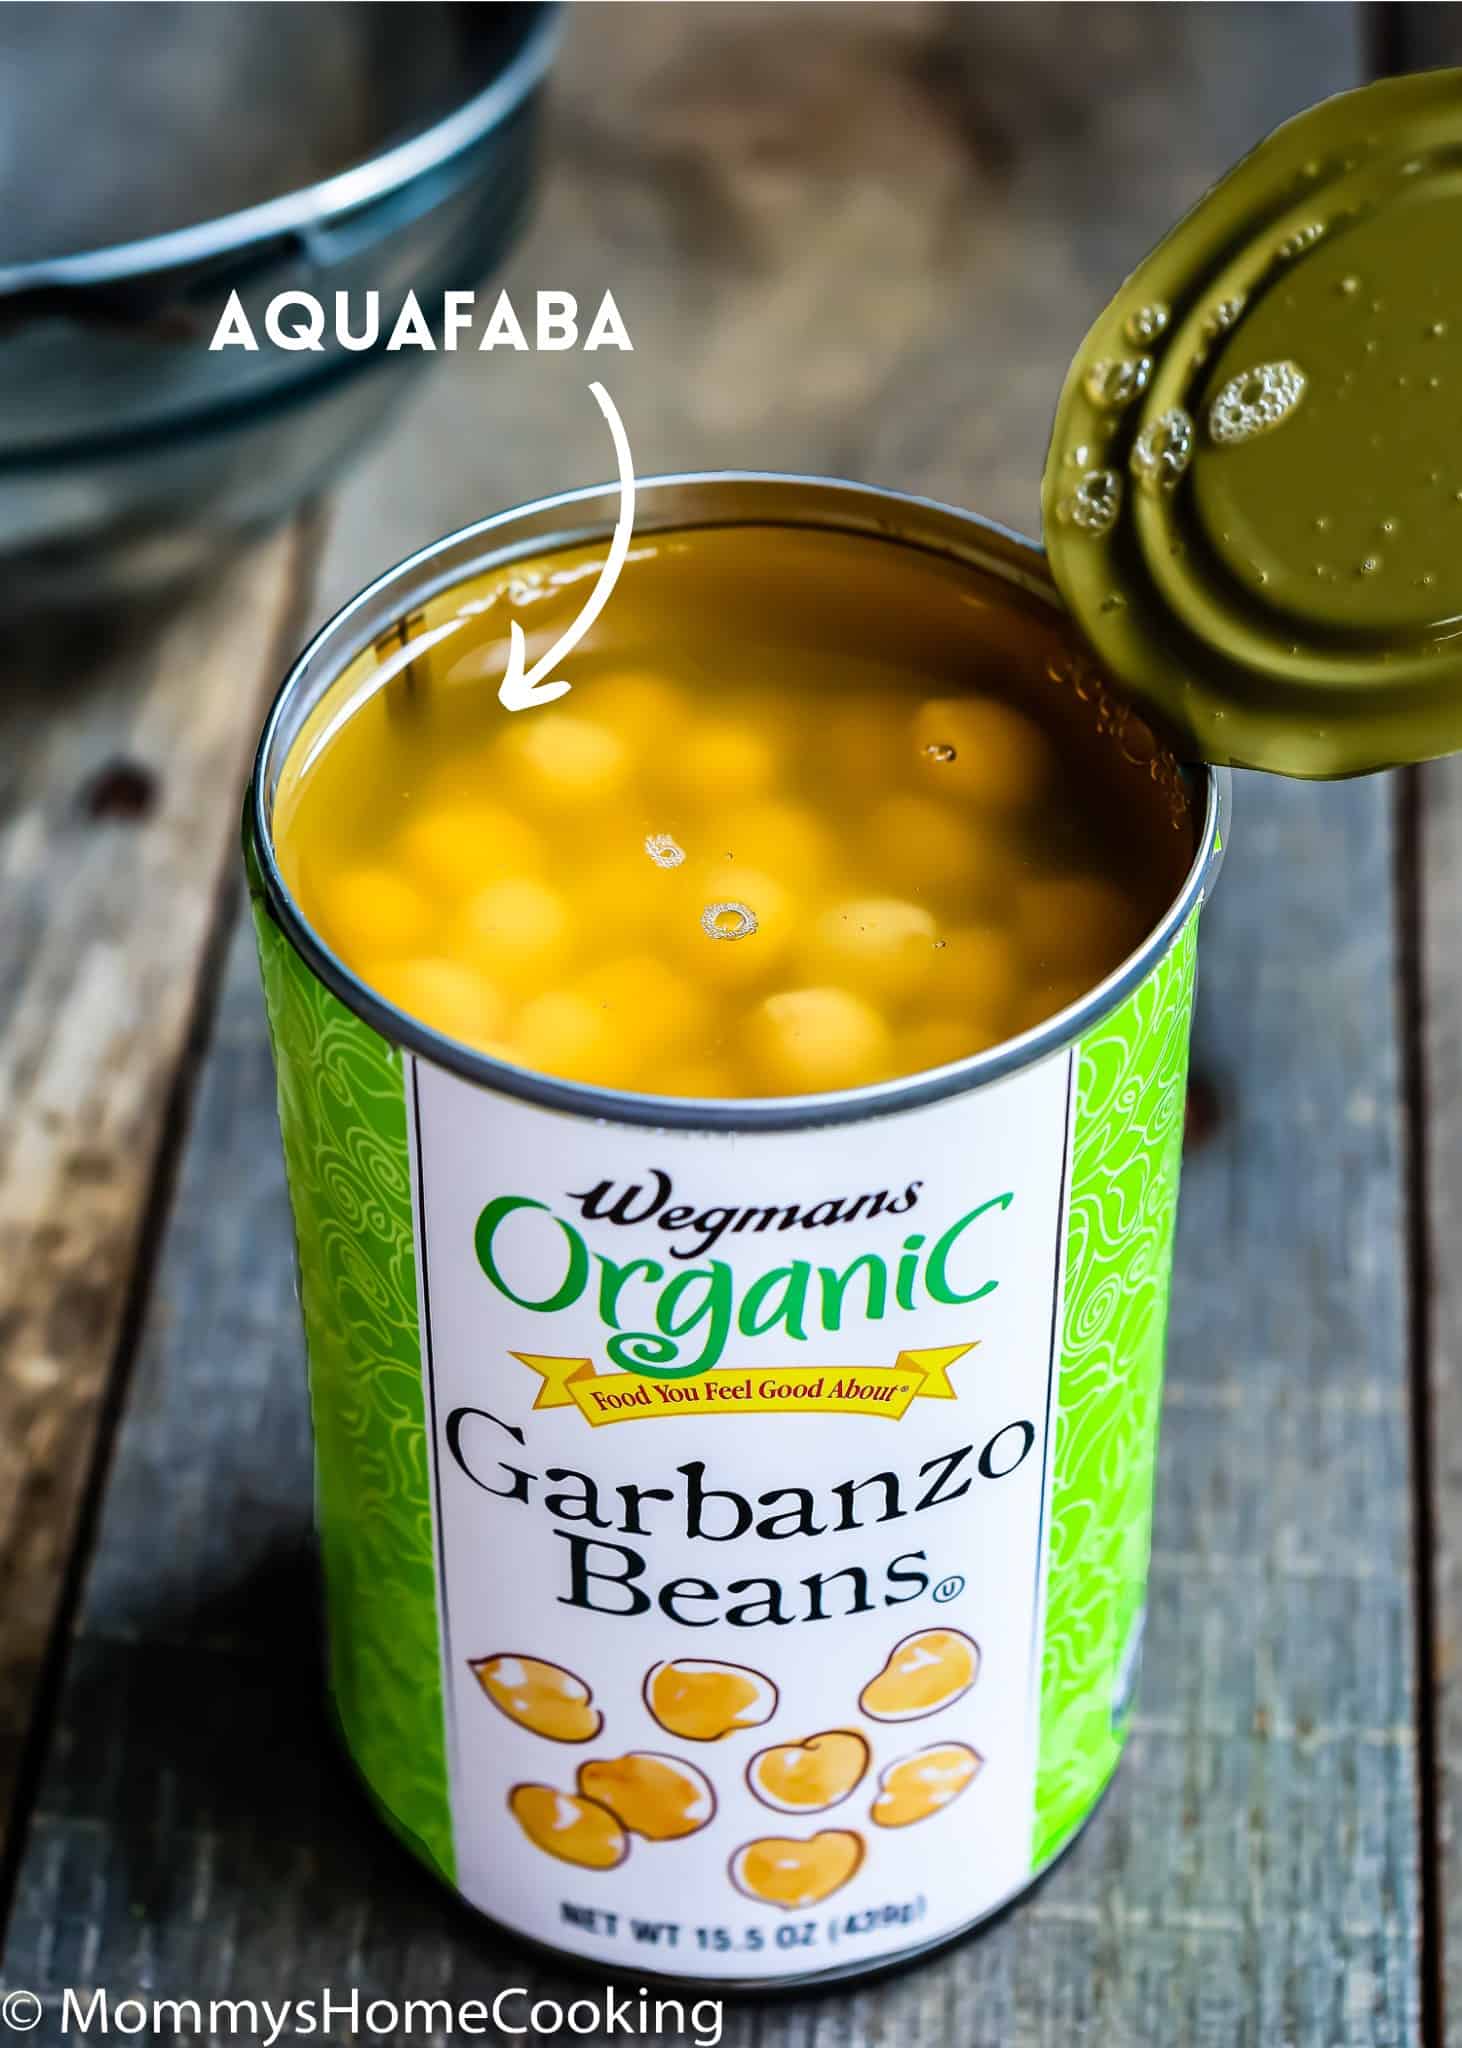 a can of garbanzo beans and aquafaba.